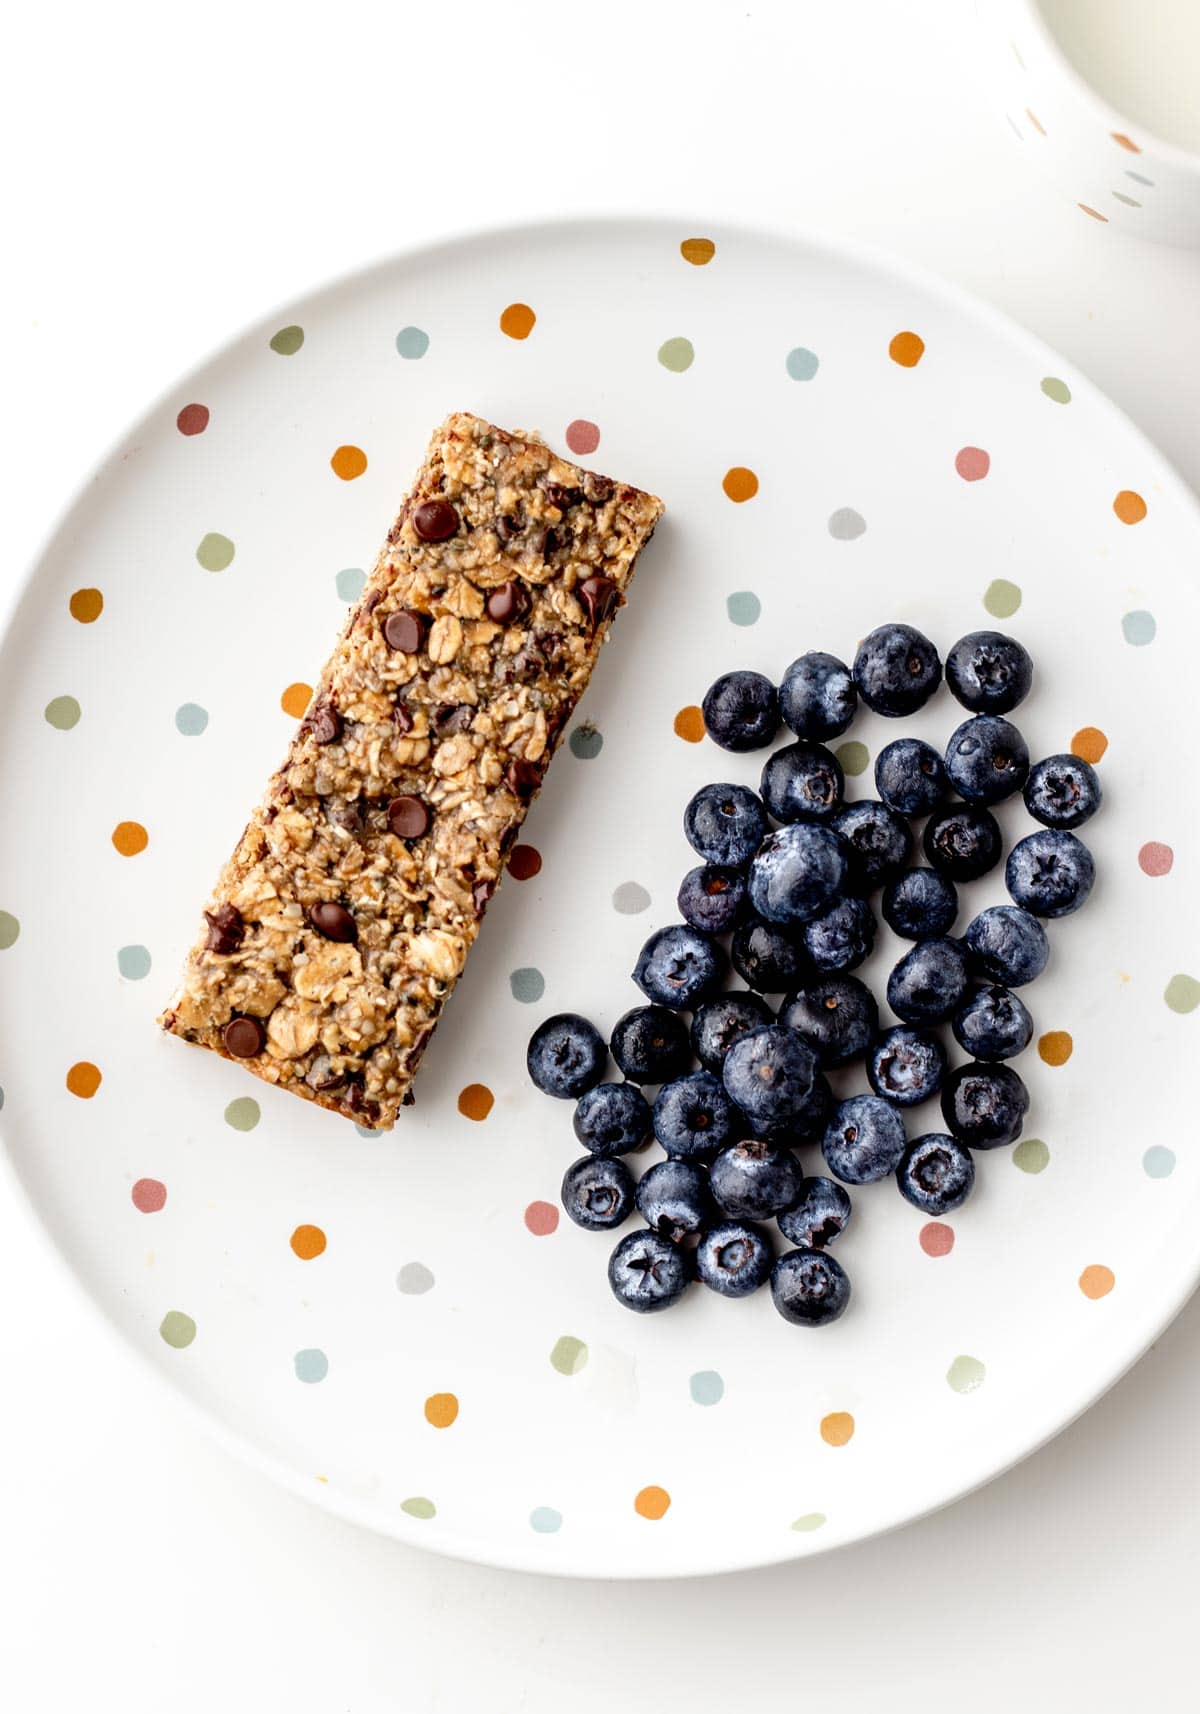 A nut free breakfast bar and a handful of blueberries on a polka dotted plate.